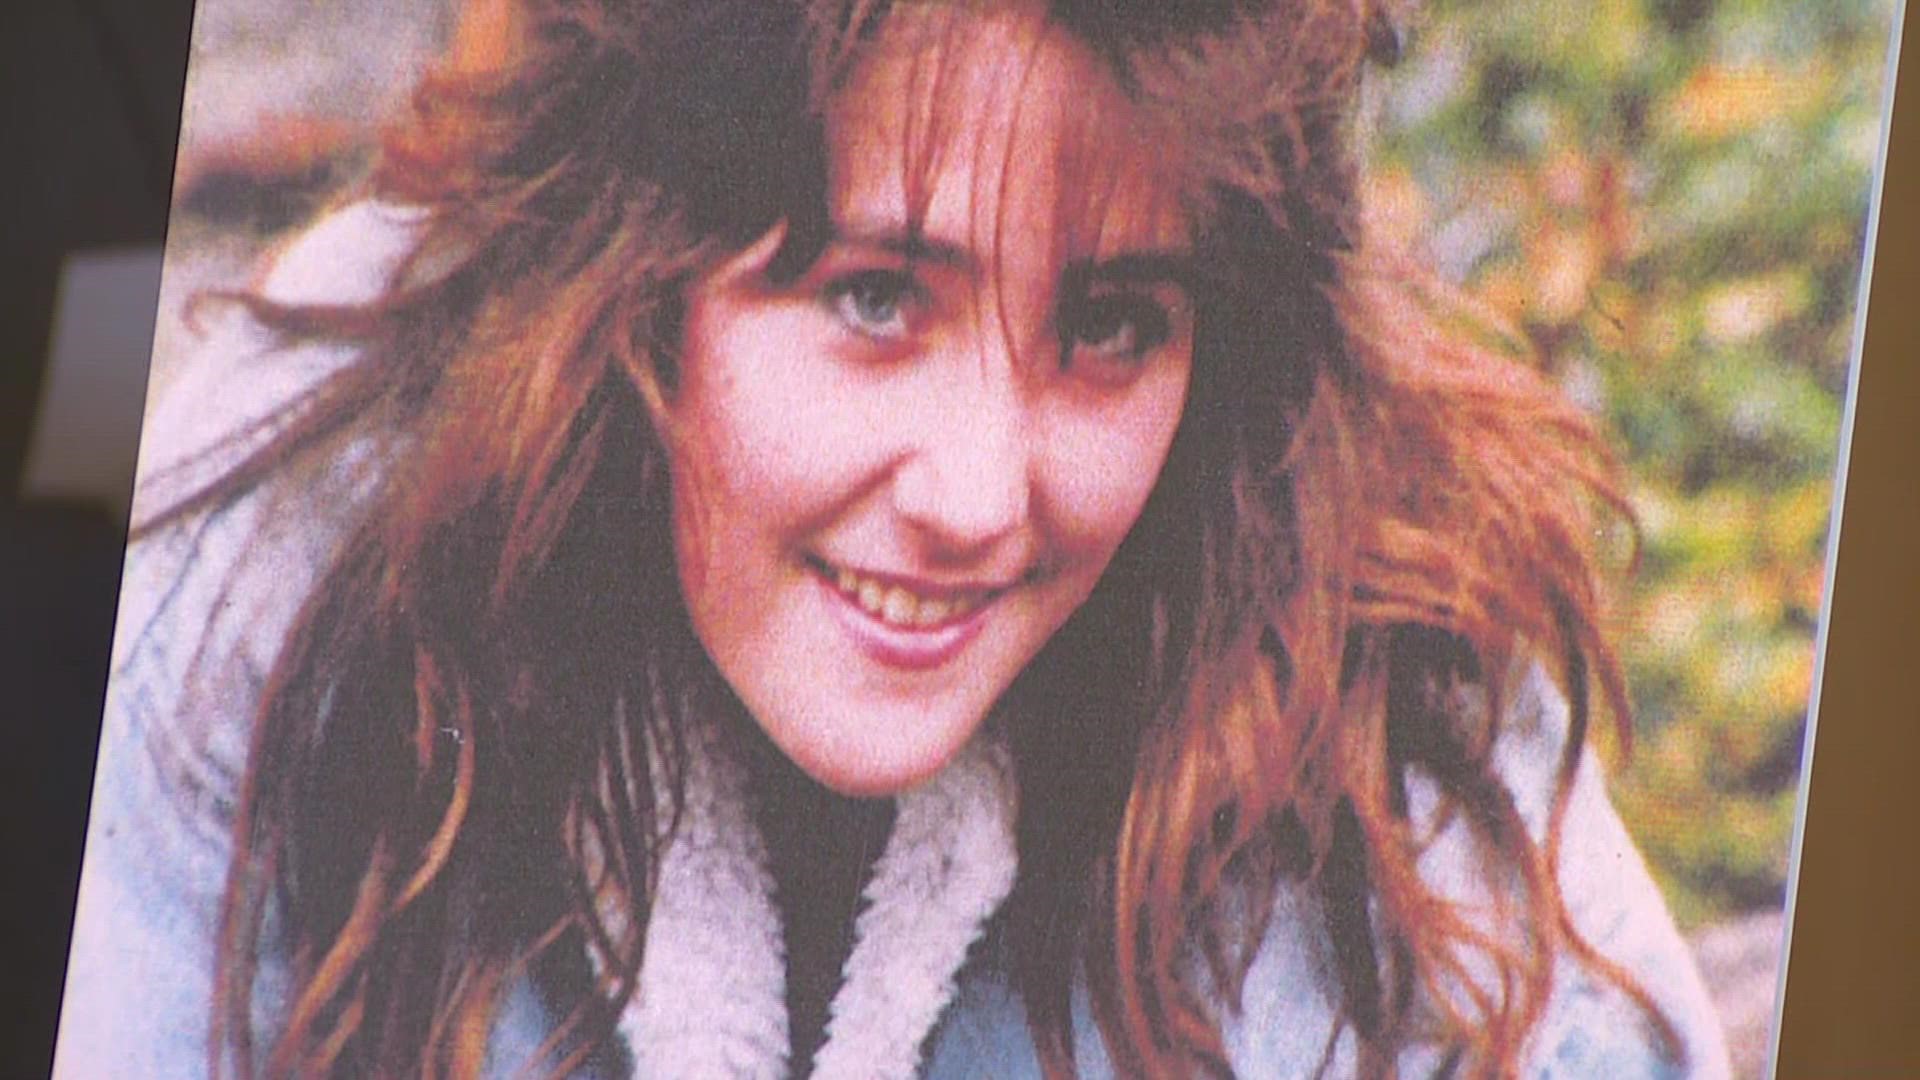 A suspect in the killing of 17-year-old Michelle Koski in 1990 has been identified through the use of forensic genealogy, according to the Snohomish County Sheriff's